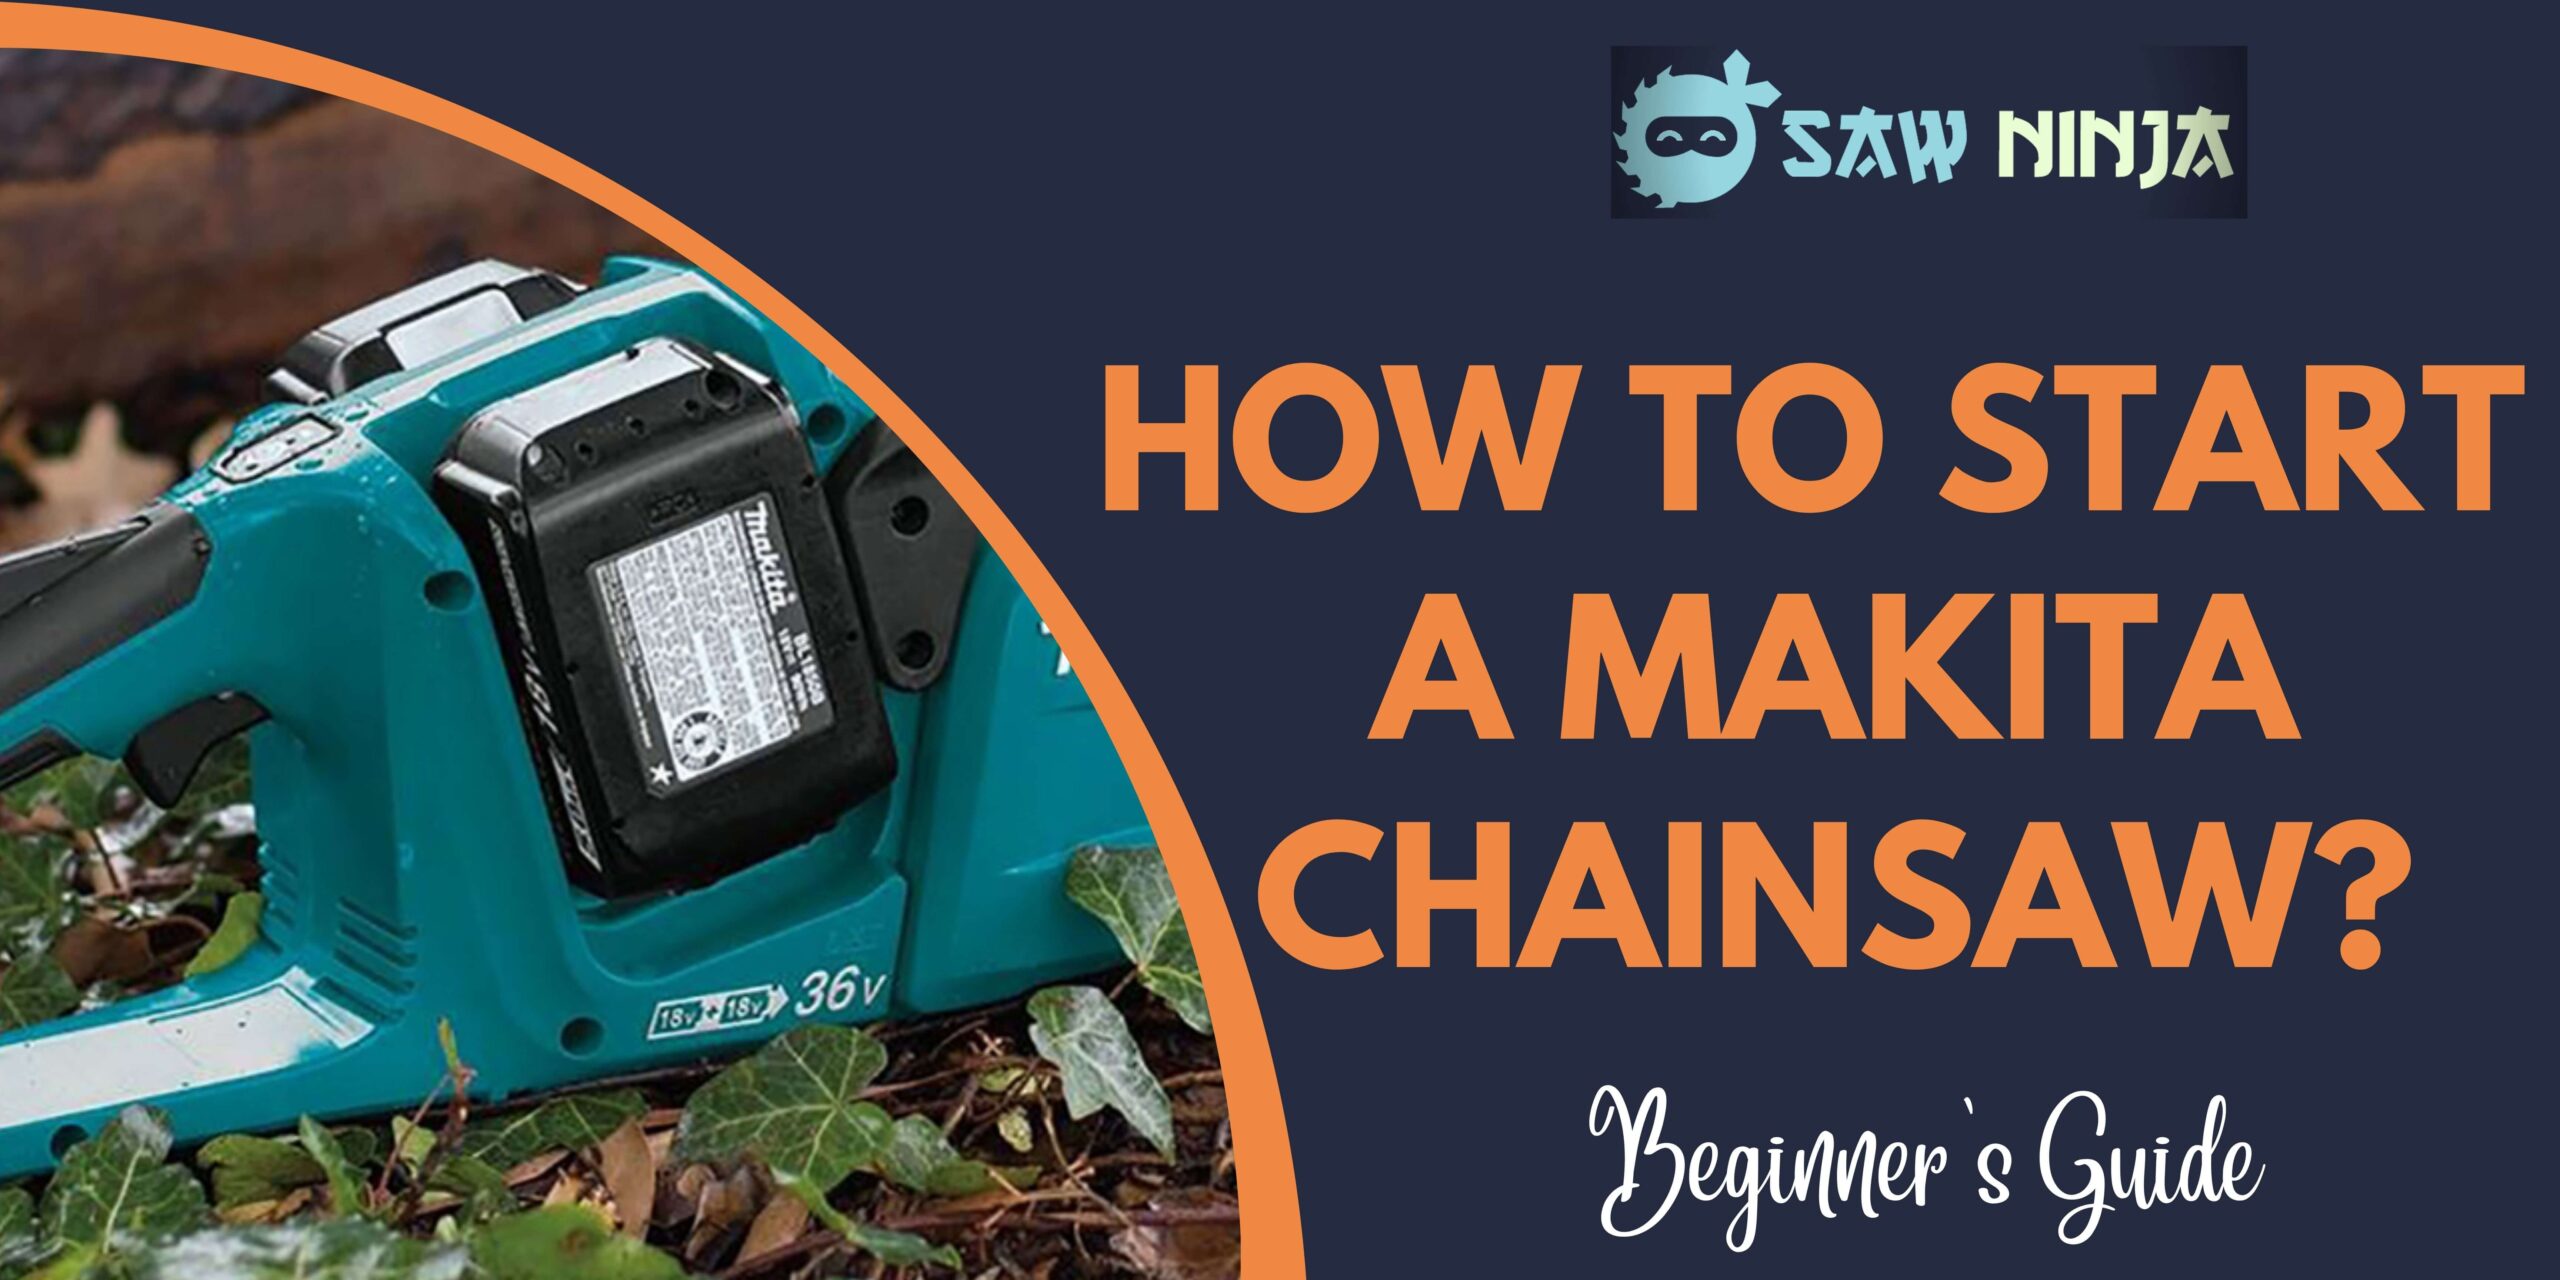 How To Start A Makita Chainsaw